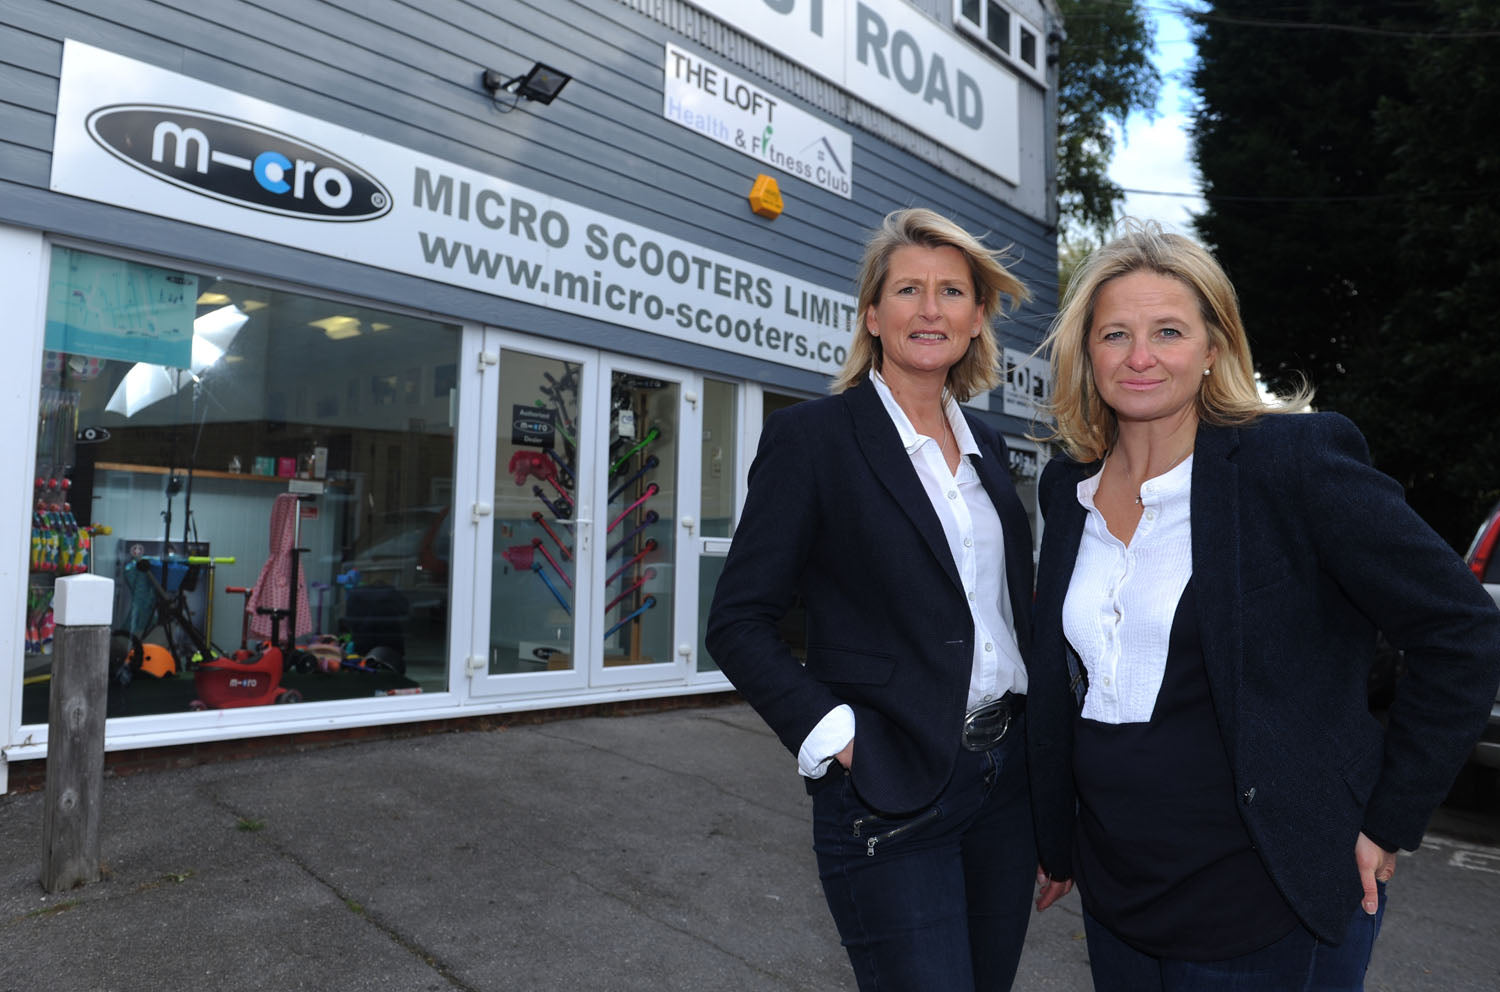 The women behind Micro Scooters